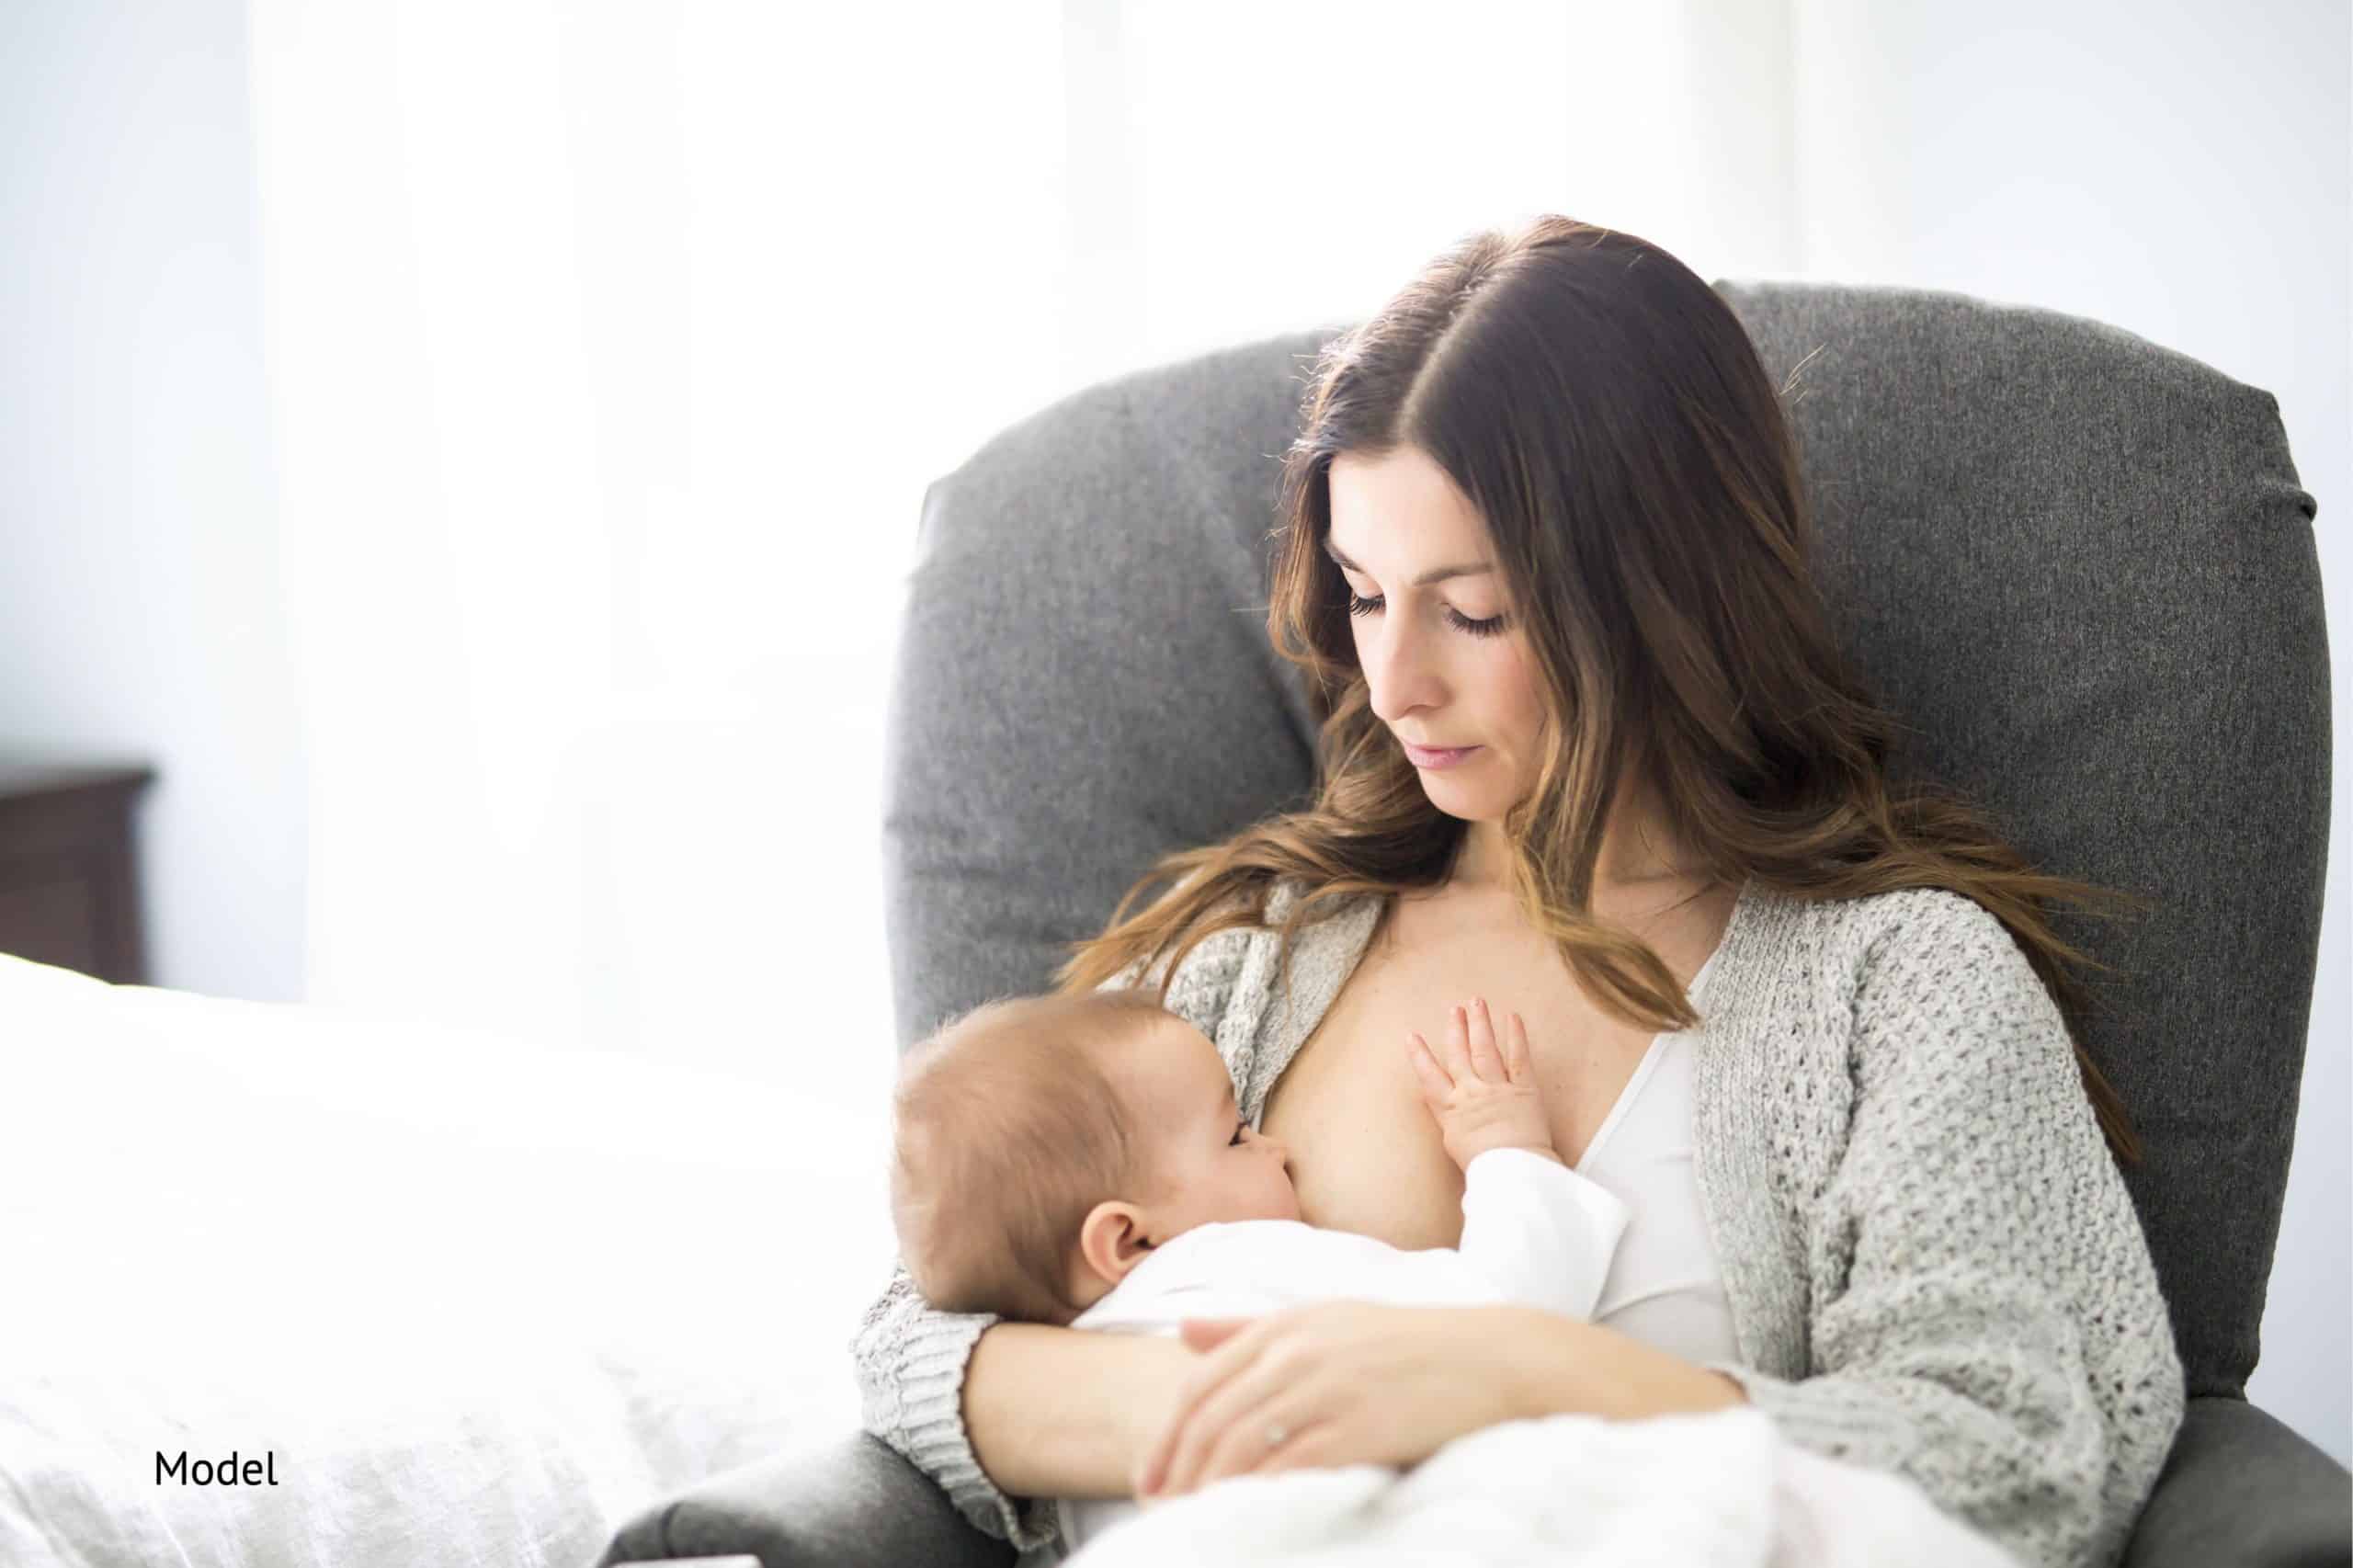 Can I Breastfeed After Different Types of Breast Surgery?